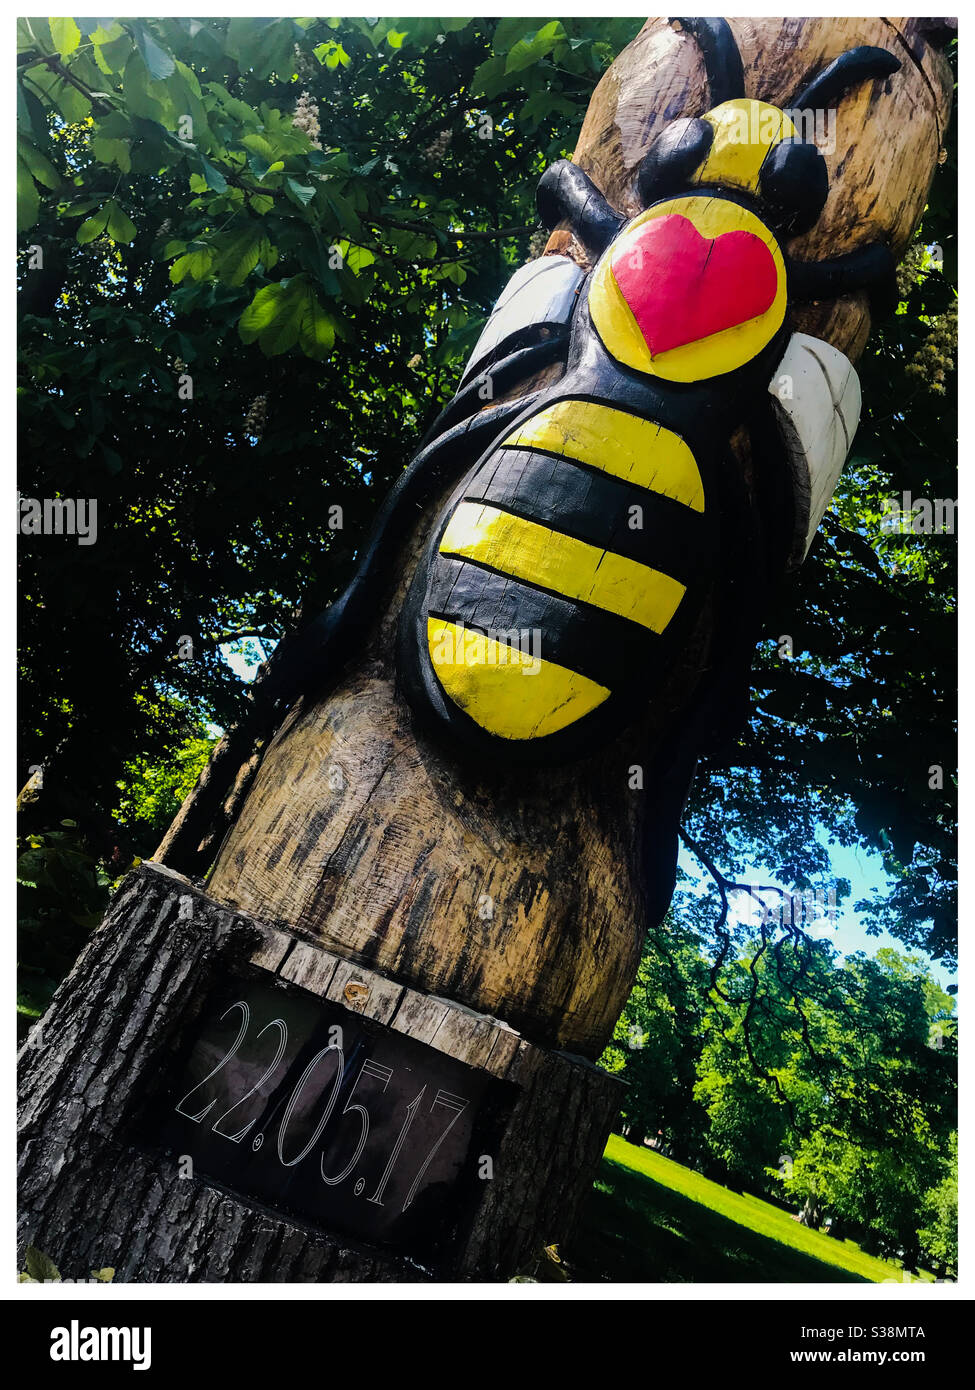 Manchester bee commemorating those killed in the arena bombing Stock Photo